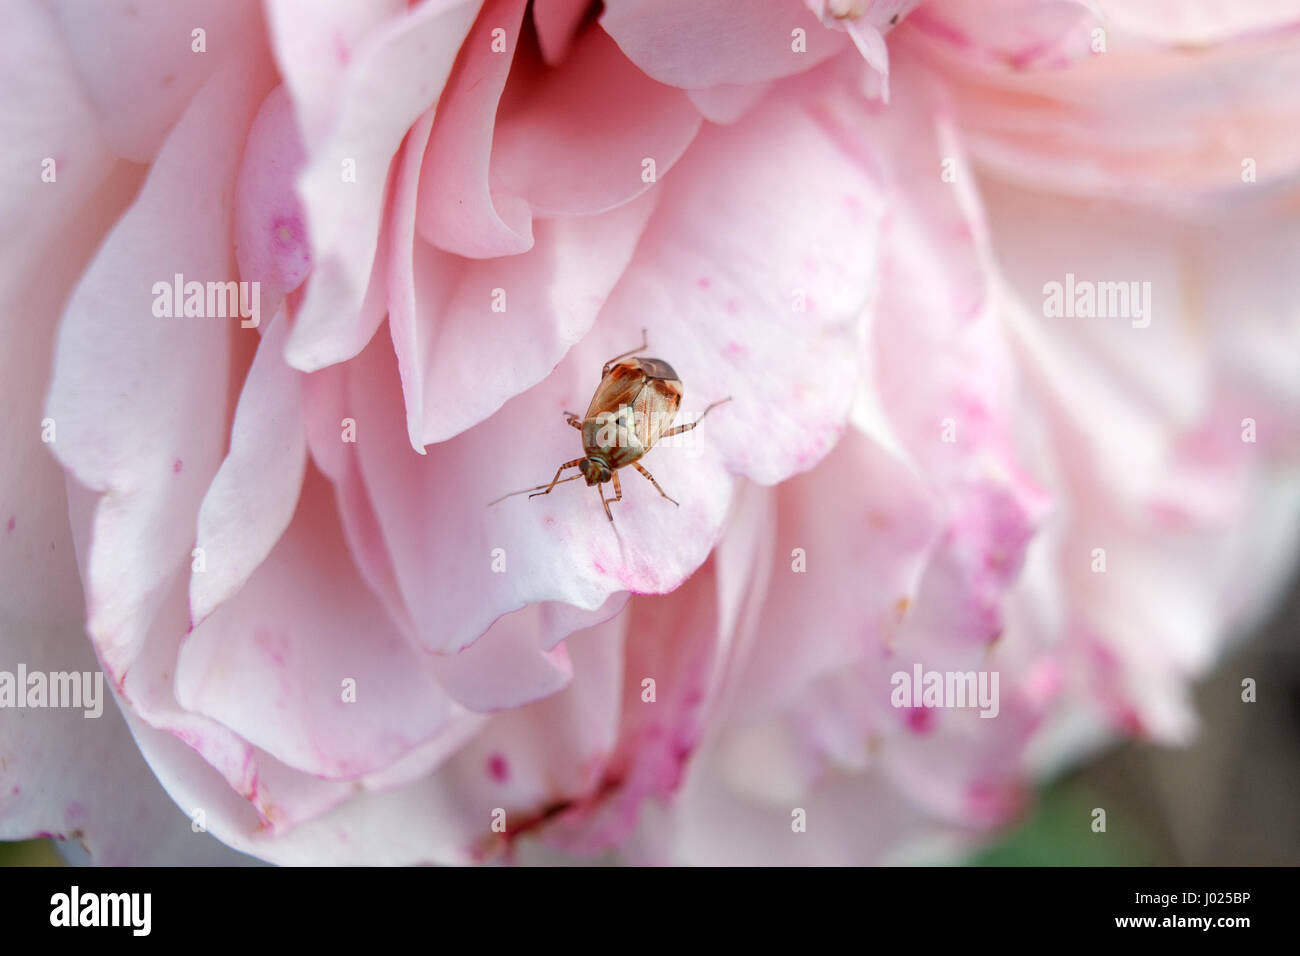 Small colorful bug on a pink rose. Garden scene of close up insect that is resting on a pinkish rose. Blurred background with focus on an animal. Stock Photo